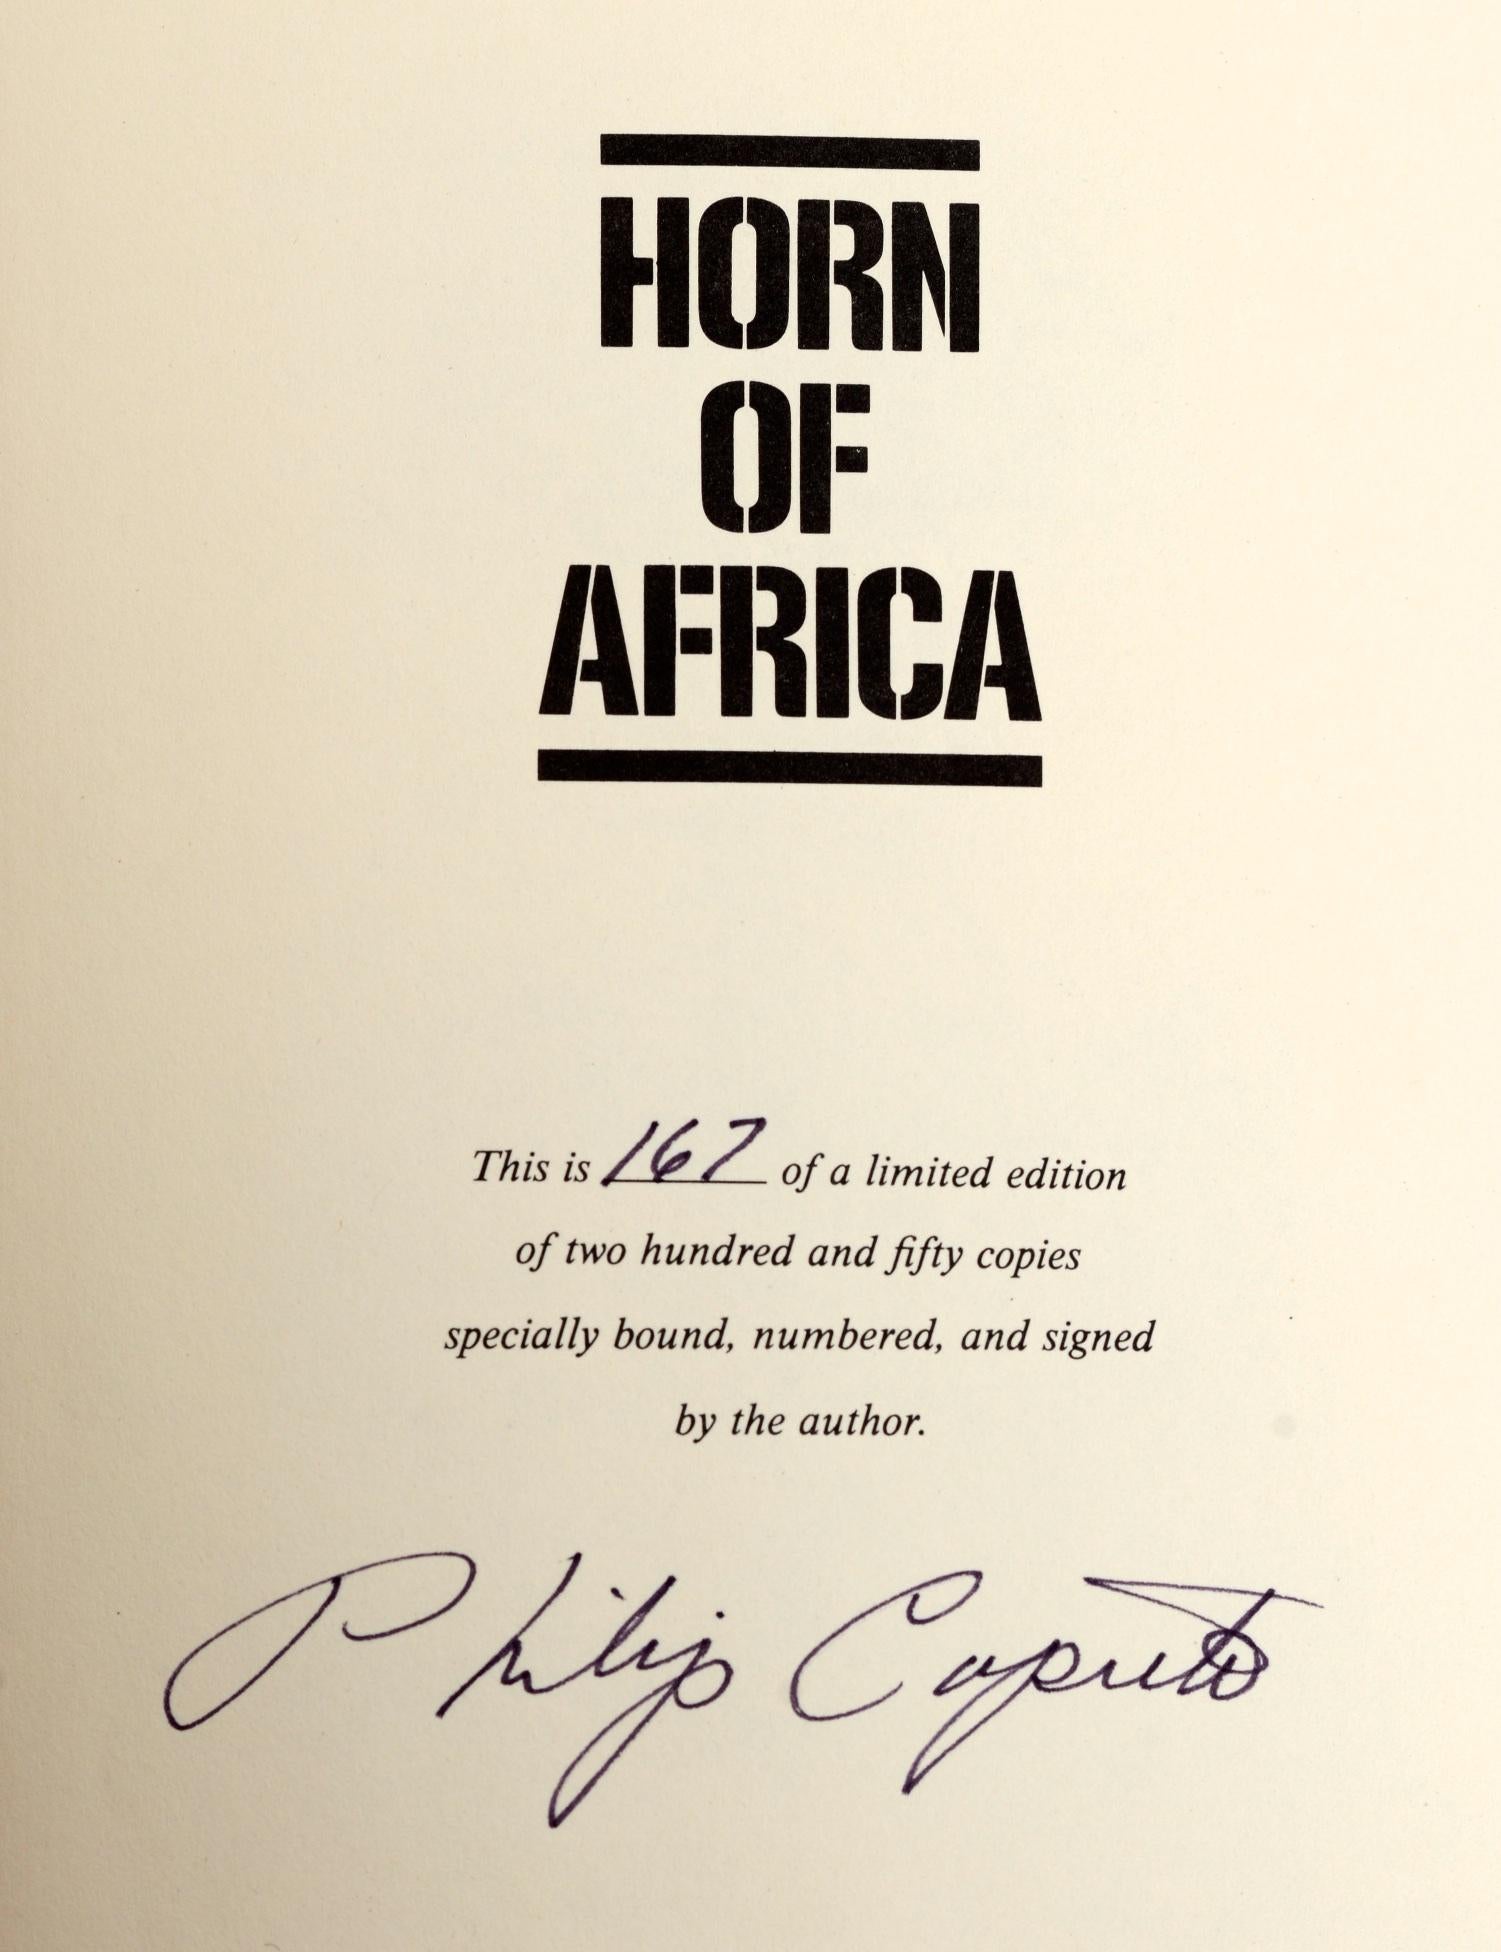 American Horn of Africa by Philip Caputo Signed Numbered Limited Edition, Specially Bound For Sale